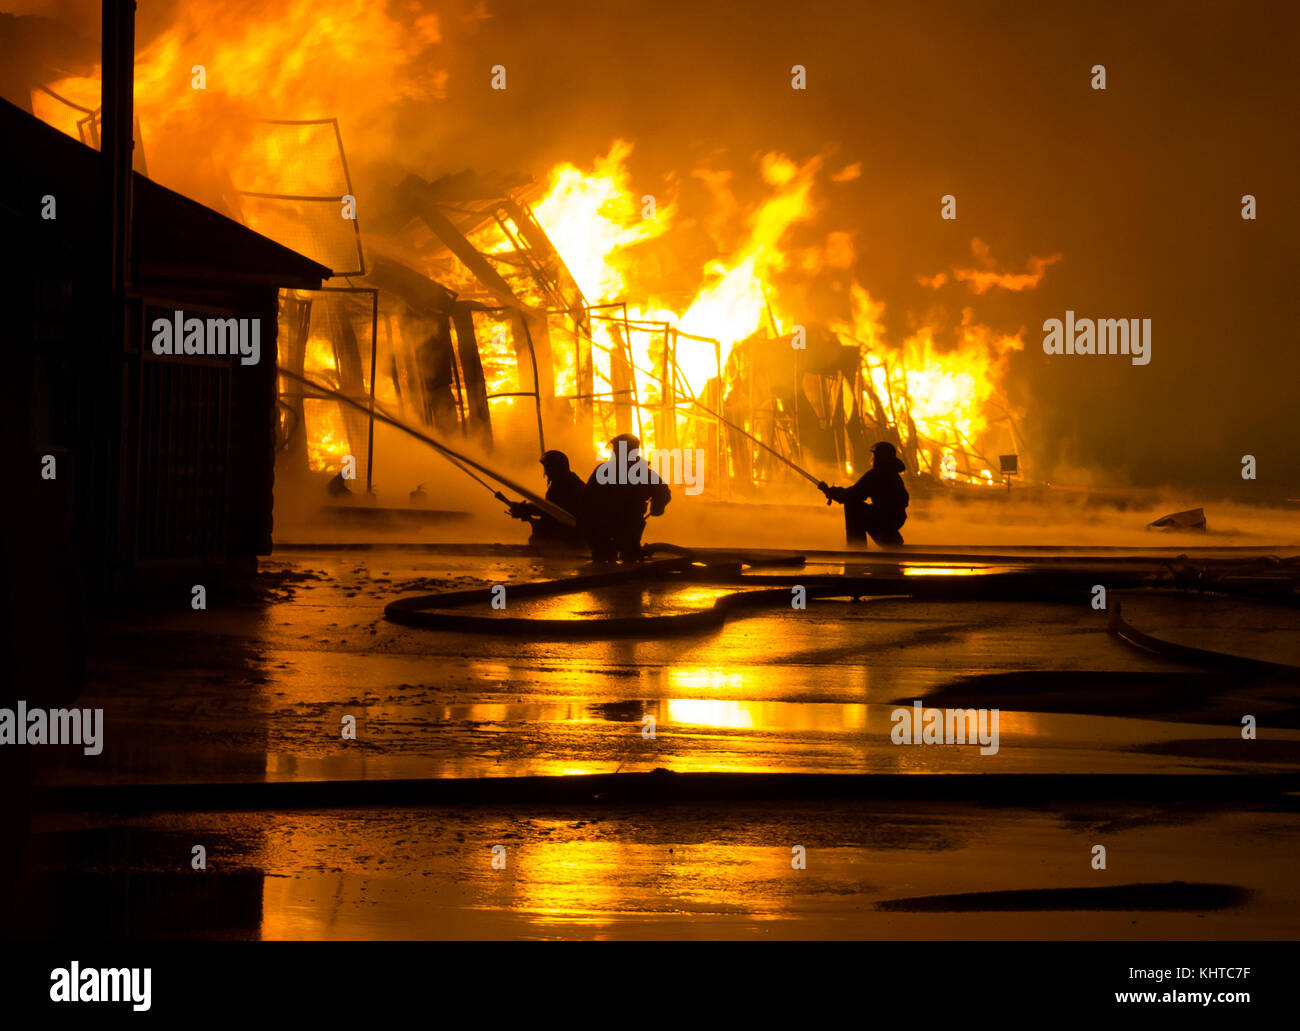 Firemen at work on fire Stock Photo